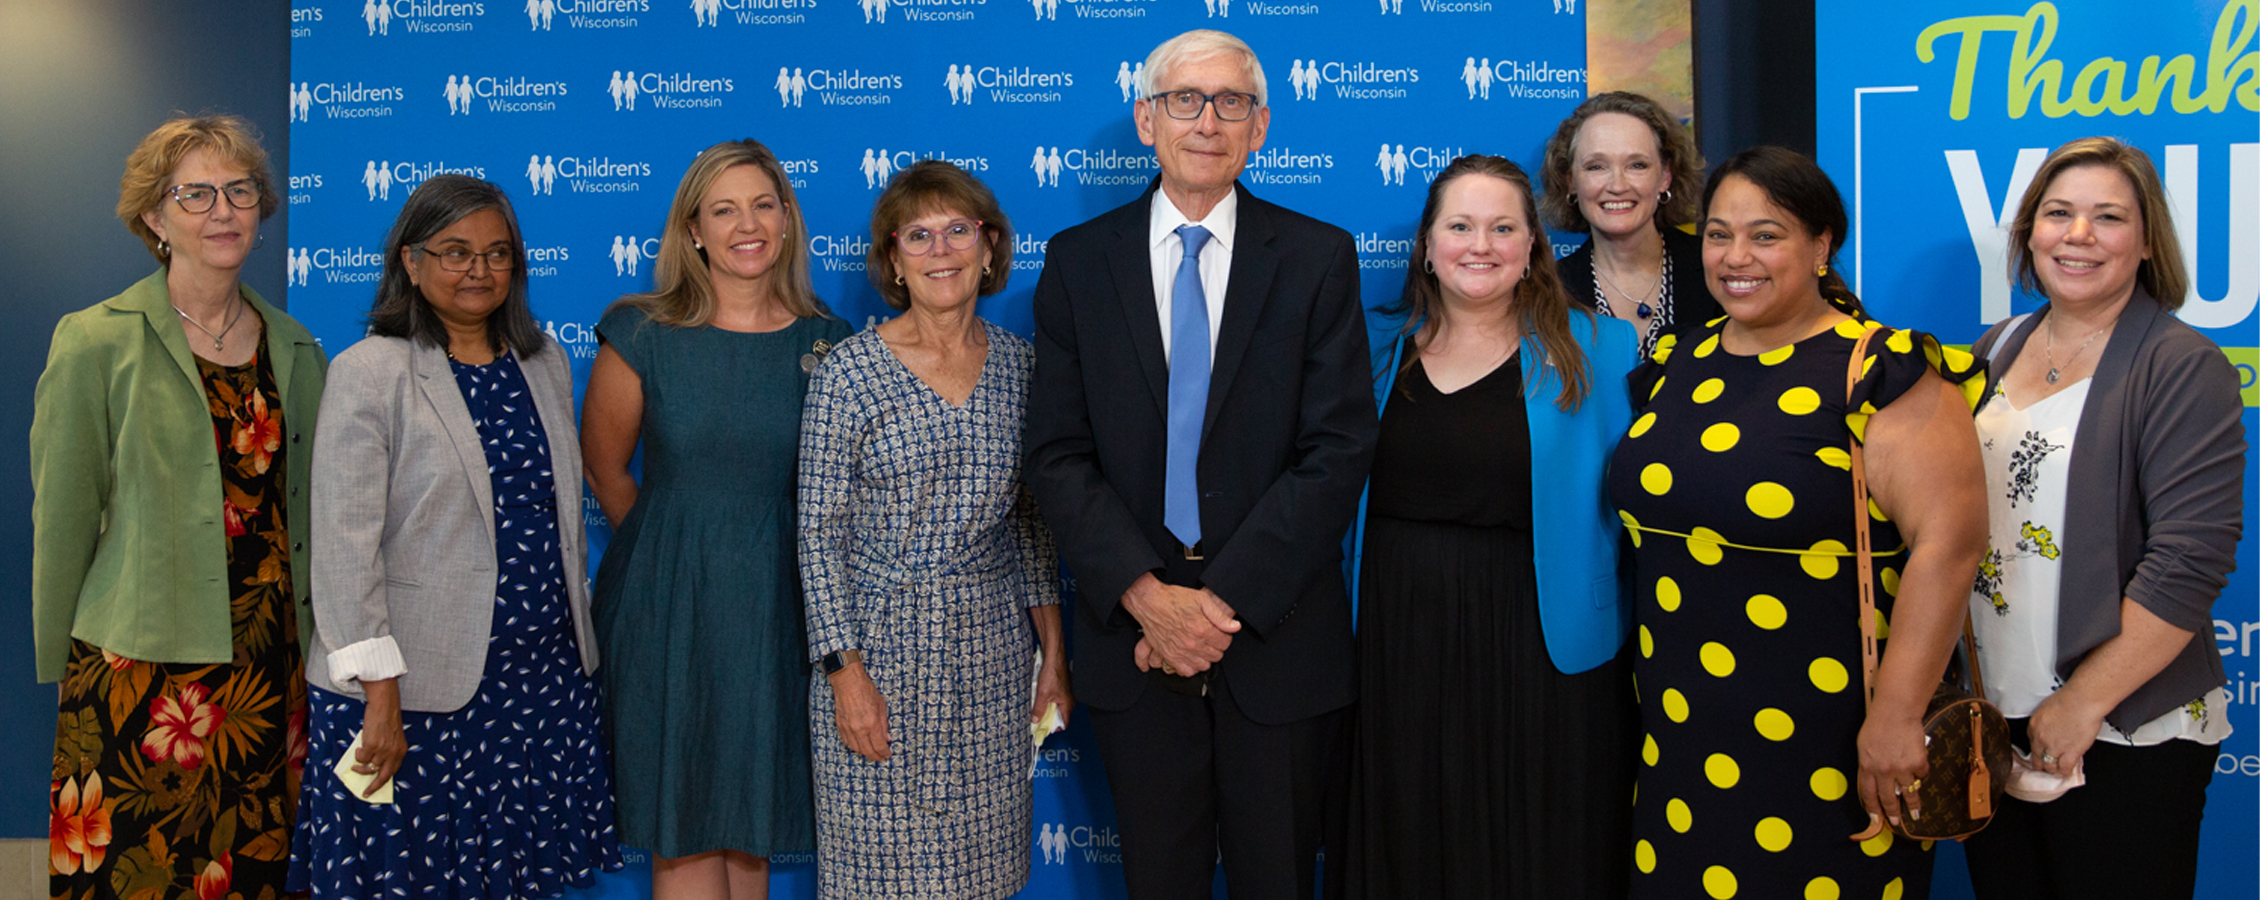 Governor Tony Evers stands with other professionals in front of a blue Children's Hospital backdrop.